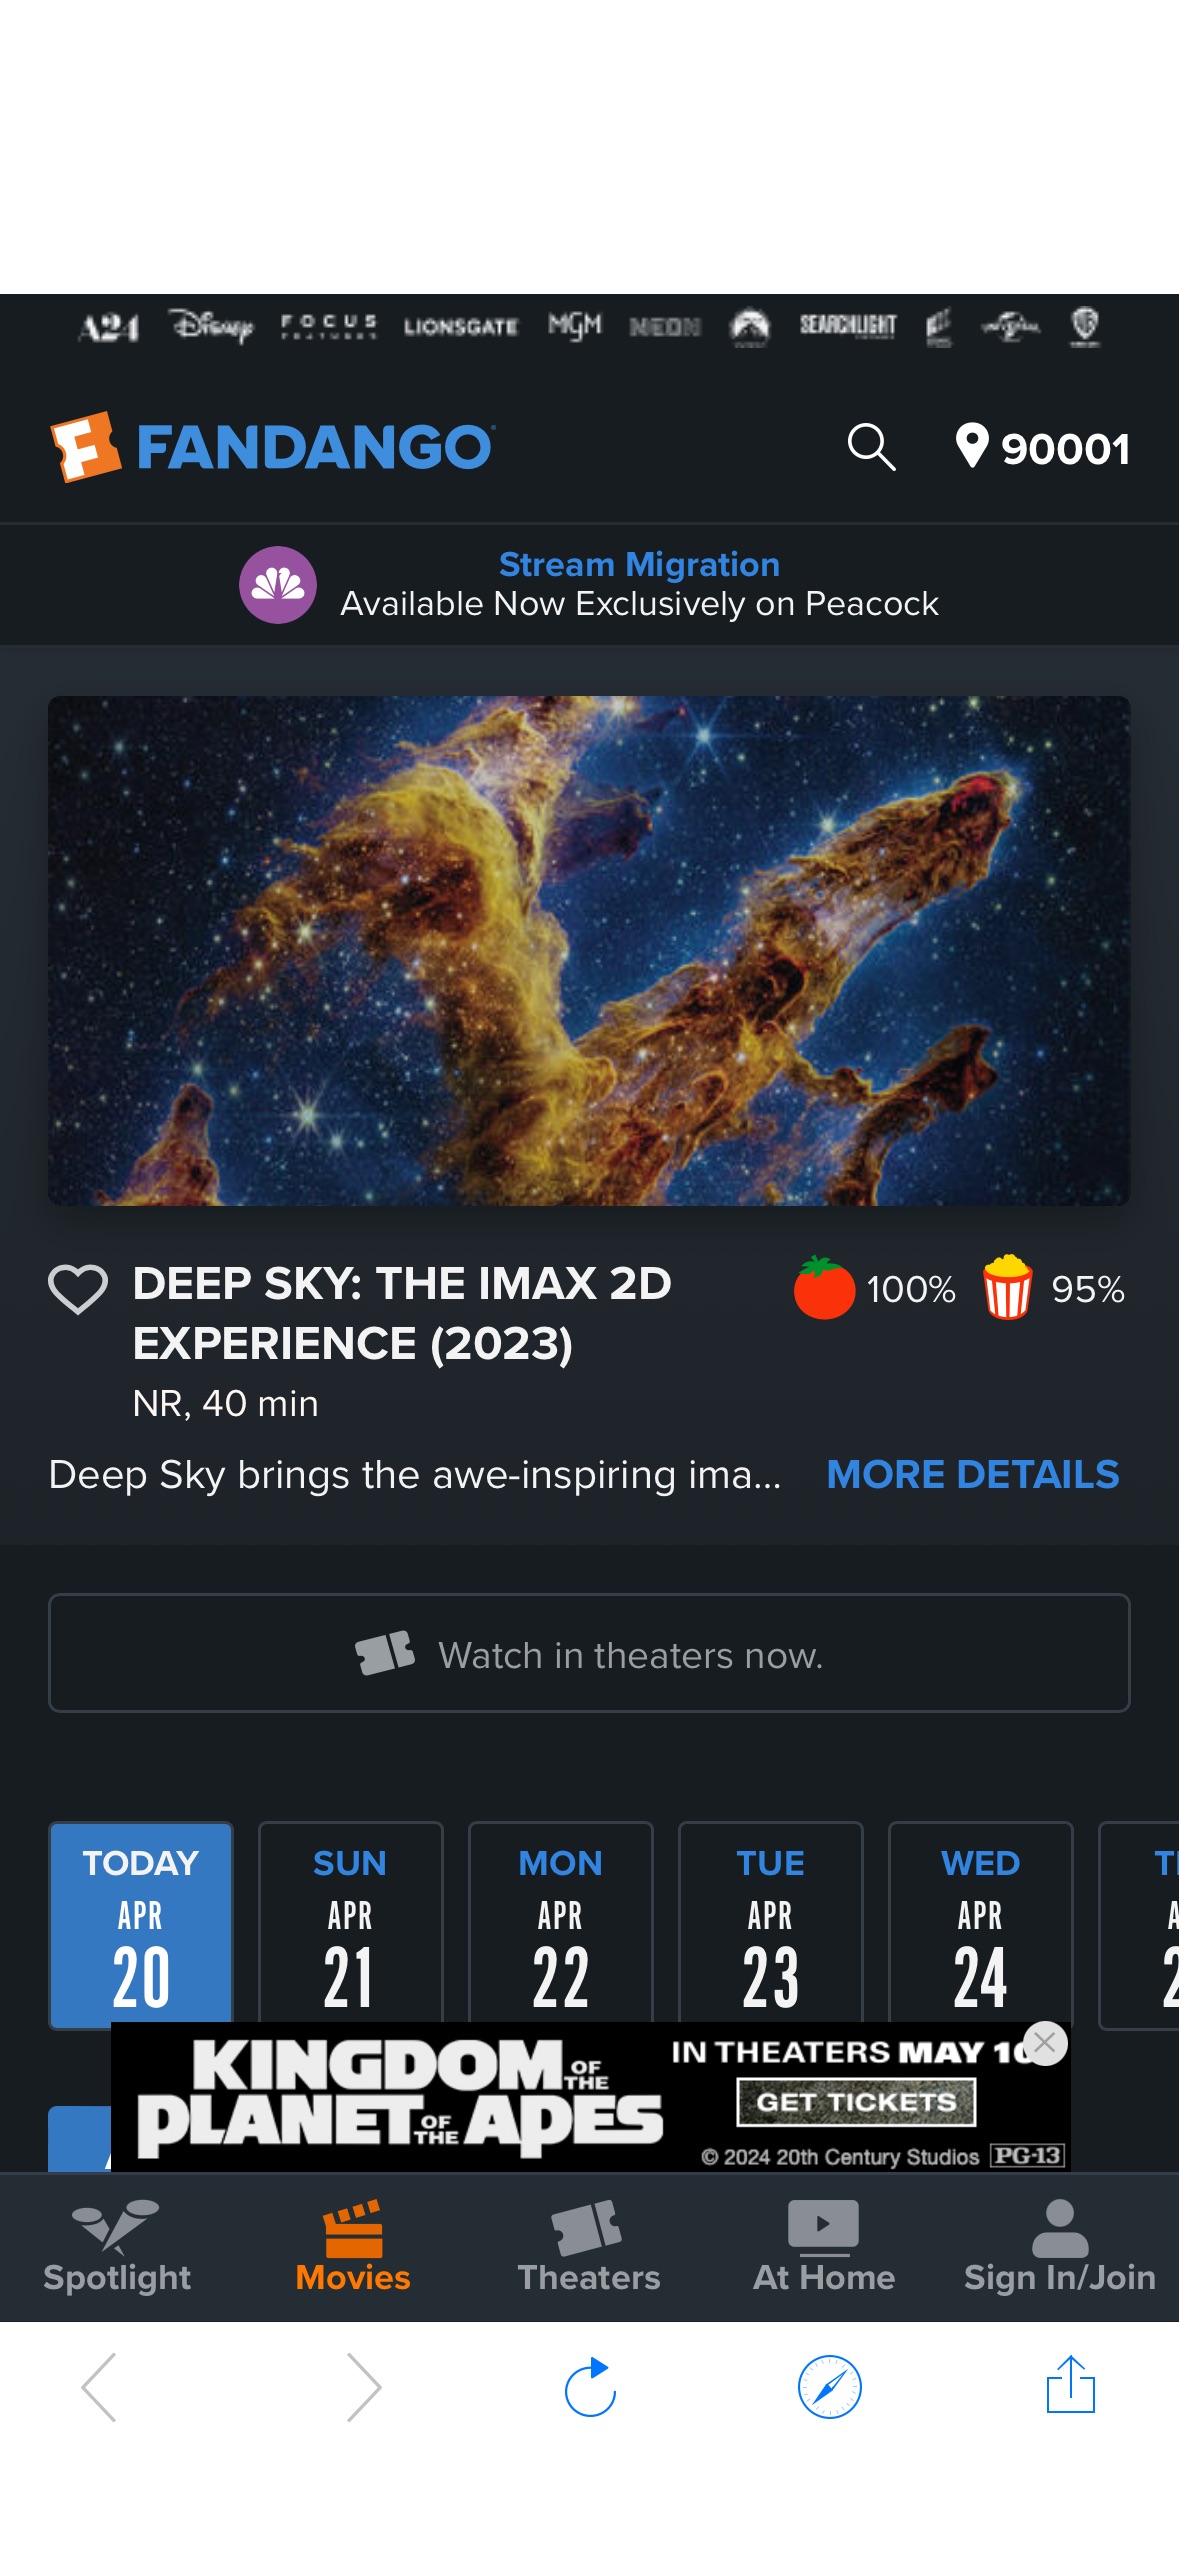 FREE Deep Sky Imax Movie Ticket
Get a FREE Deep Sky Imax Movie Ticket for a limited time! Just add one movie ticket to see DEEP SKY: THE IMAX 2D EXPERIENCE (2023) for any showing now through April 25 